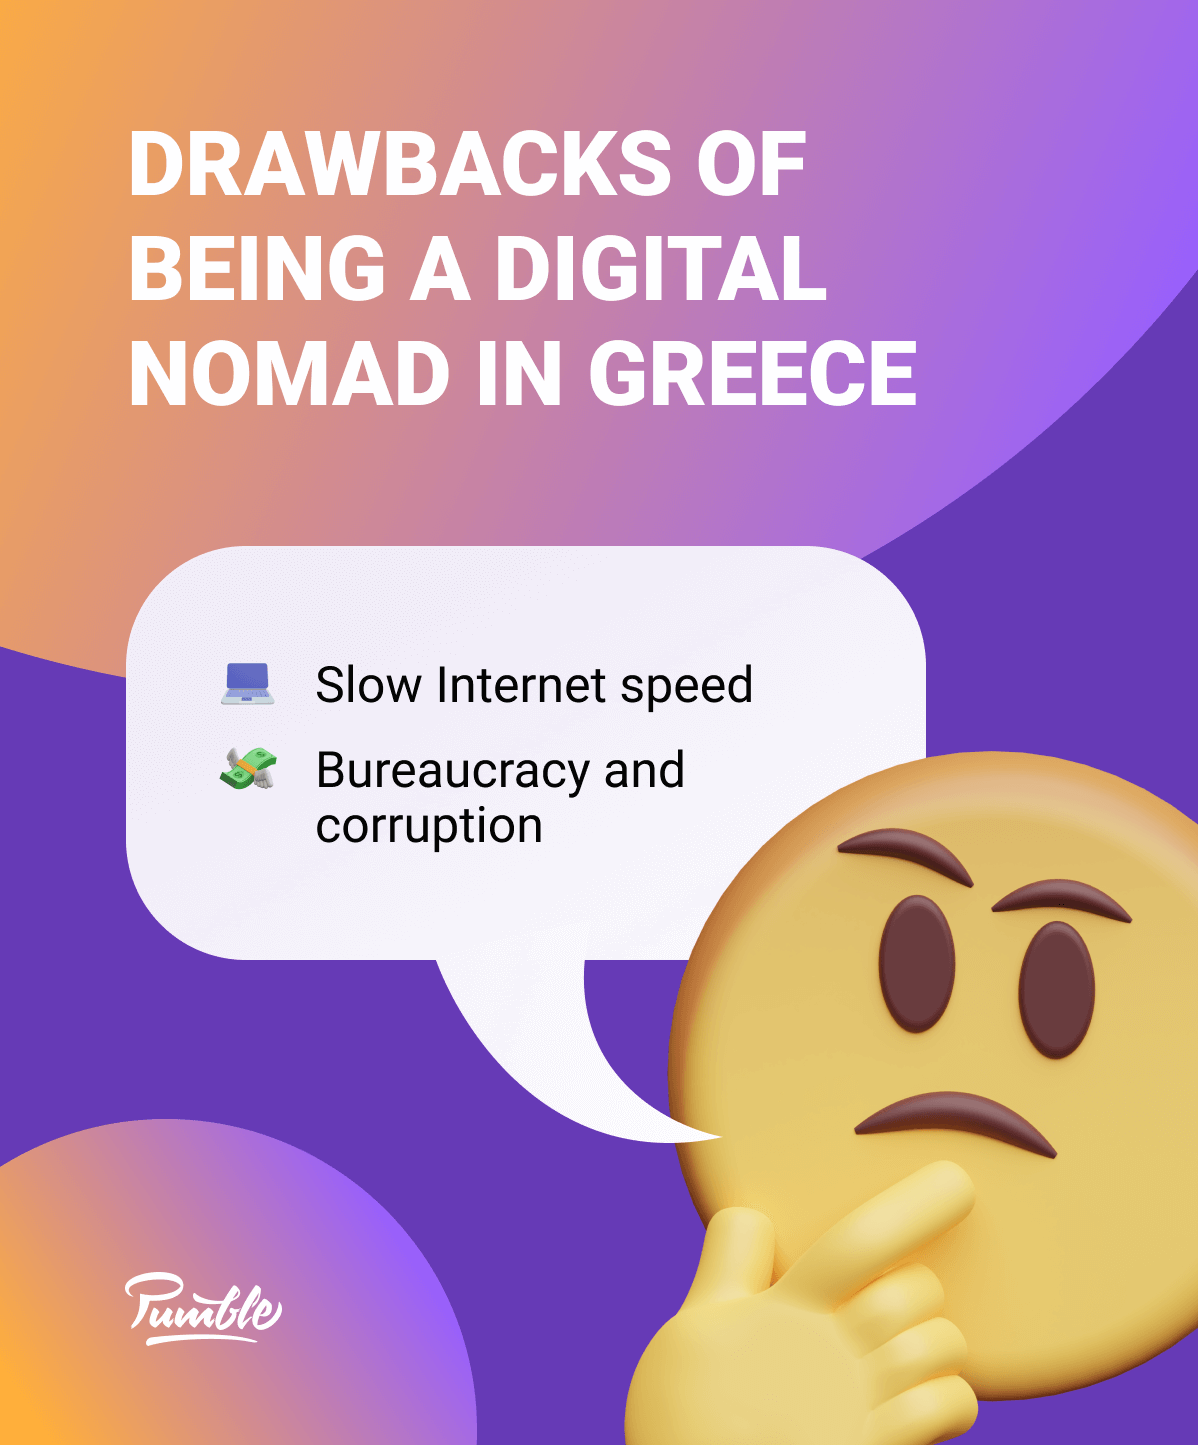 Drawbacks of being a digital nomad in GREECE